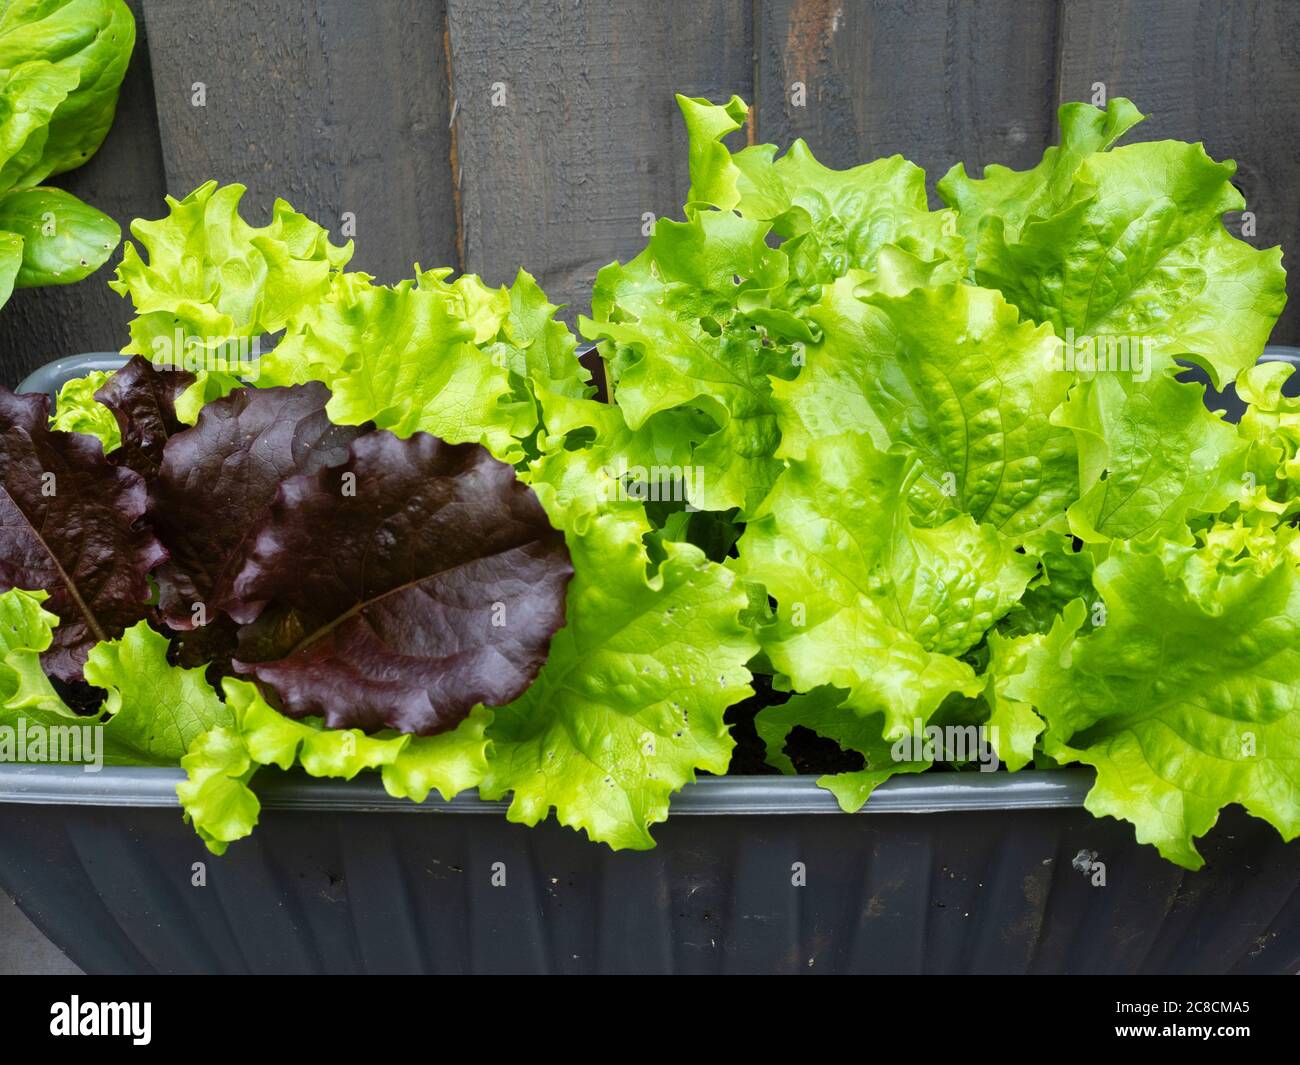 Mixed leaves of baby Leaf lettuce grown organically in a garden container Stock Photo